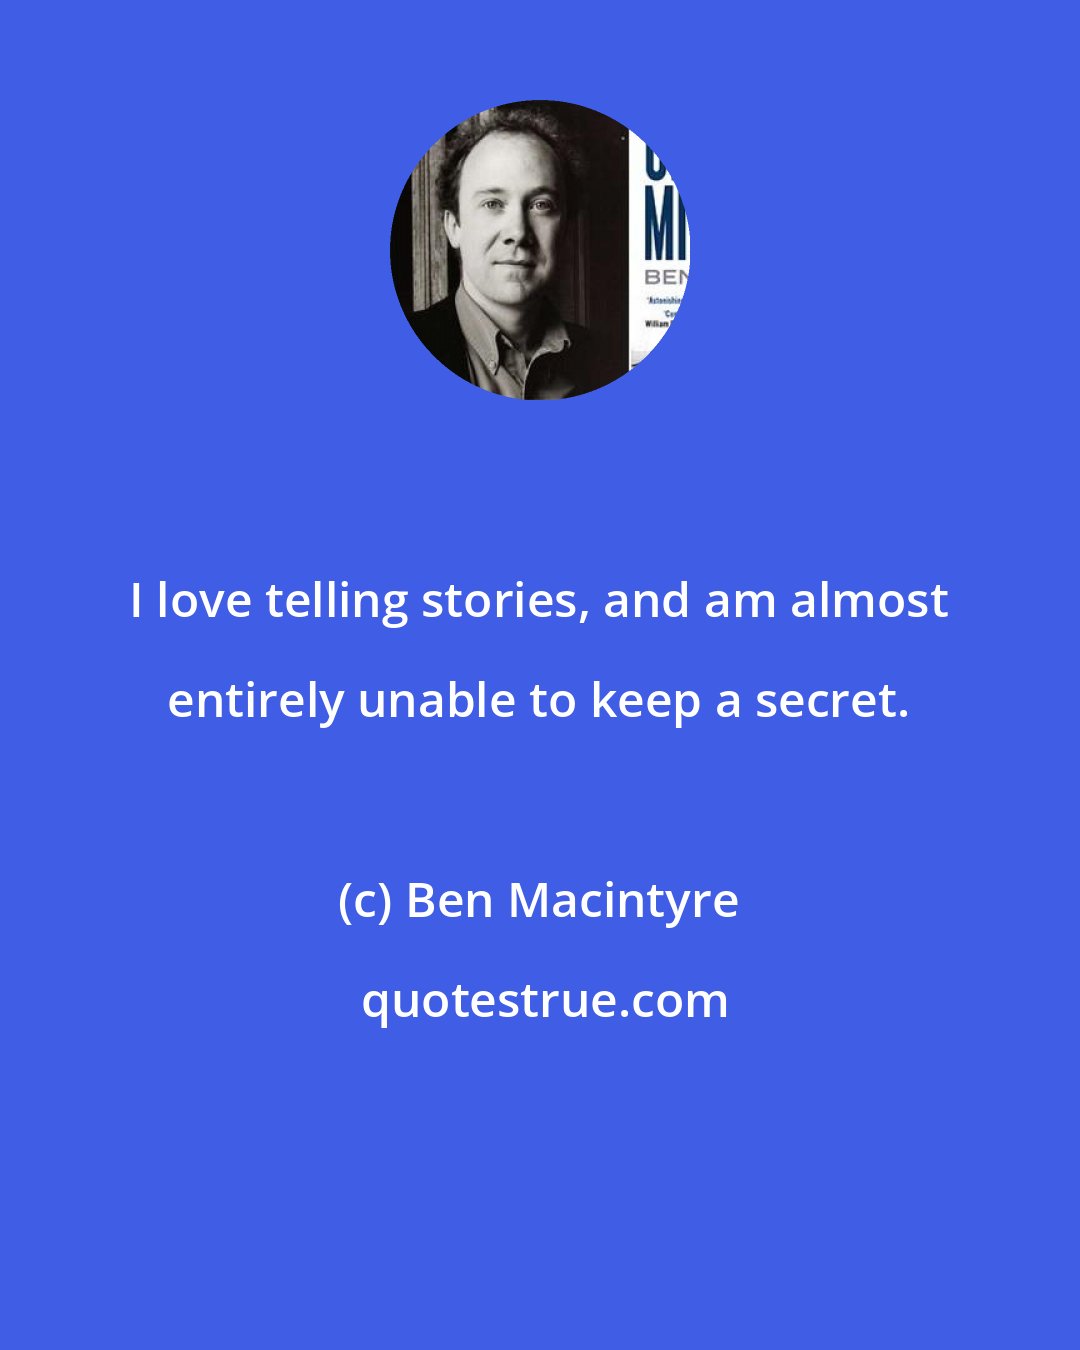 Ben Macintyre: I love telling stories, and am almost entirely unable to keep a secret.